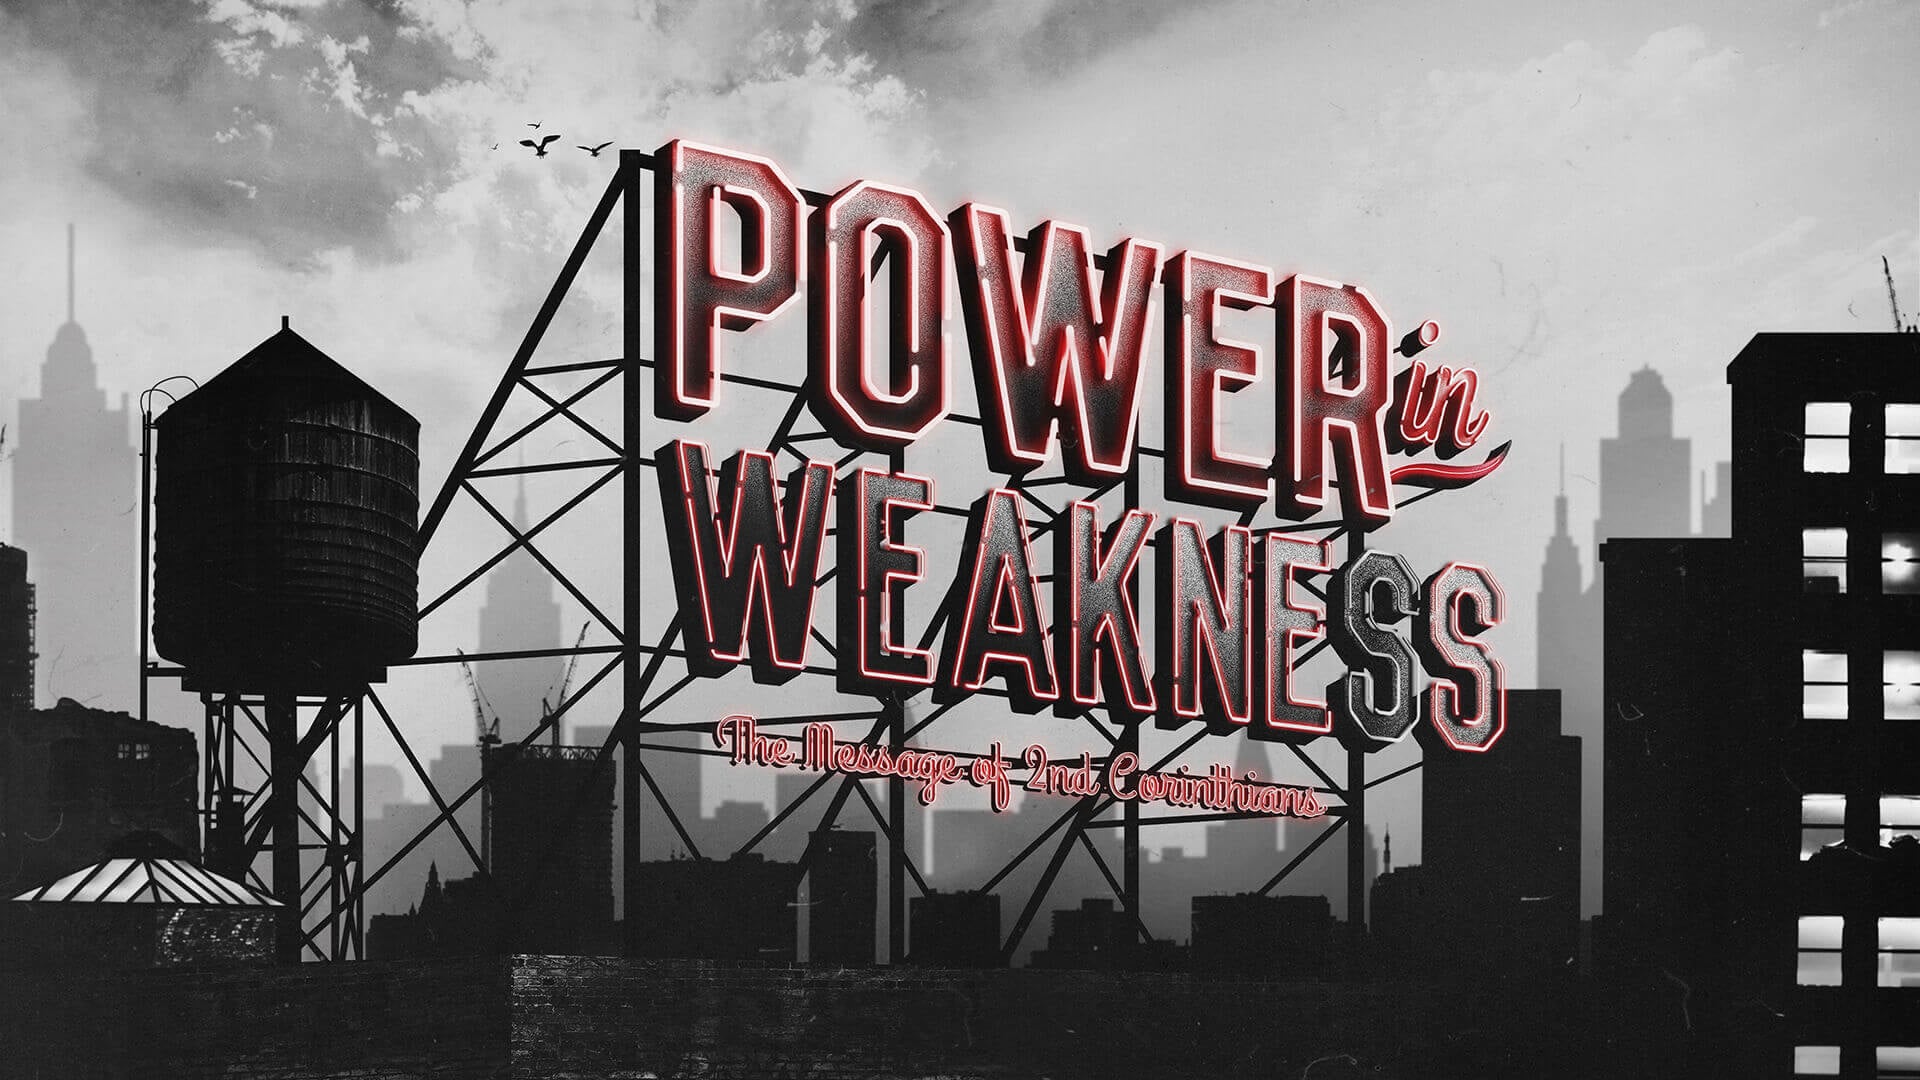 Oct 14th - Power In Weakness pt 2